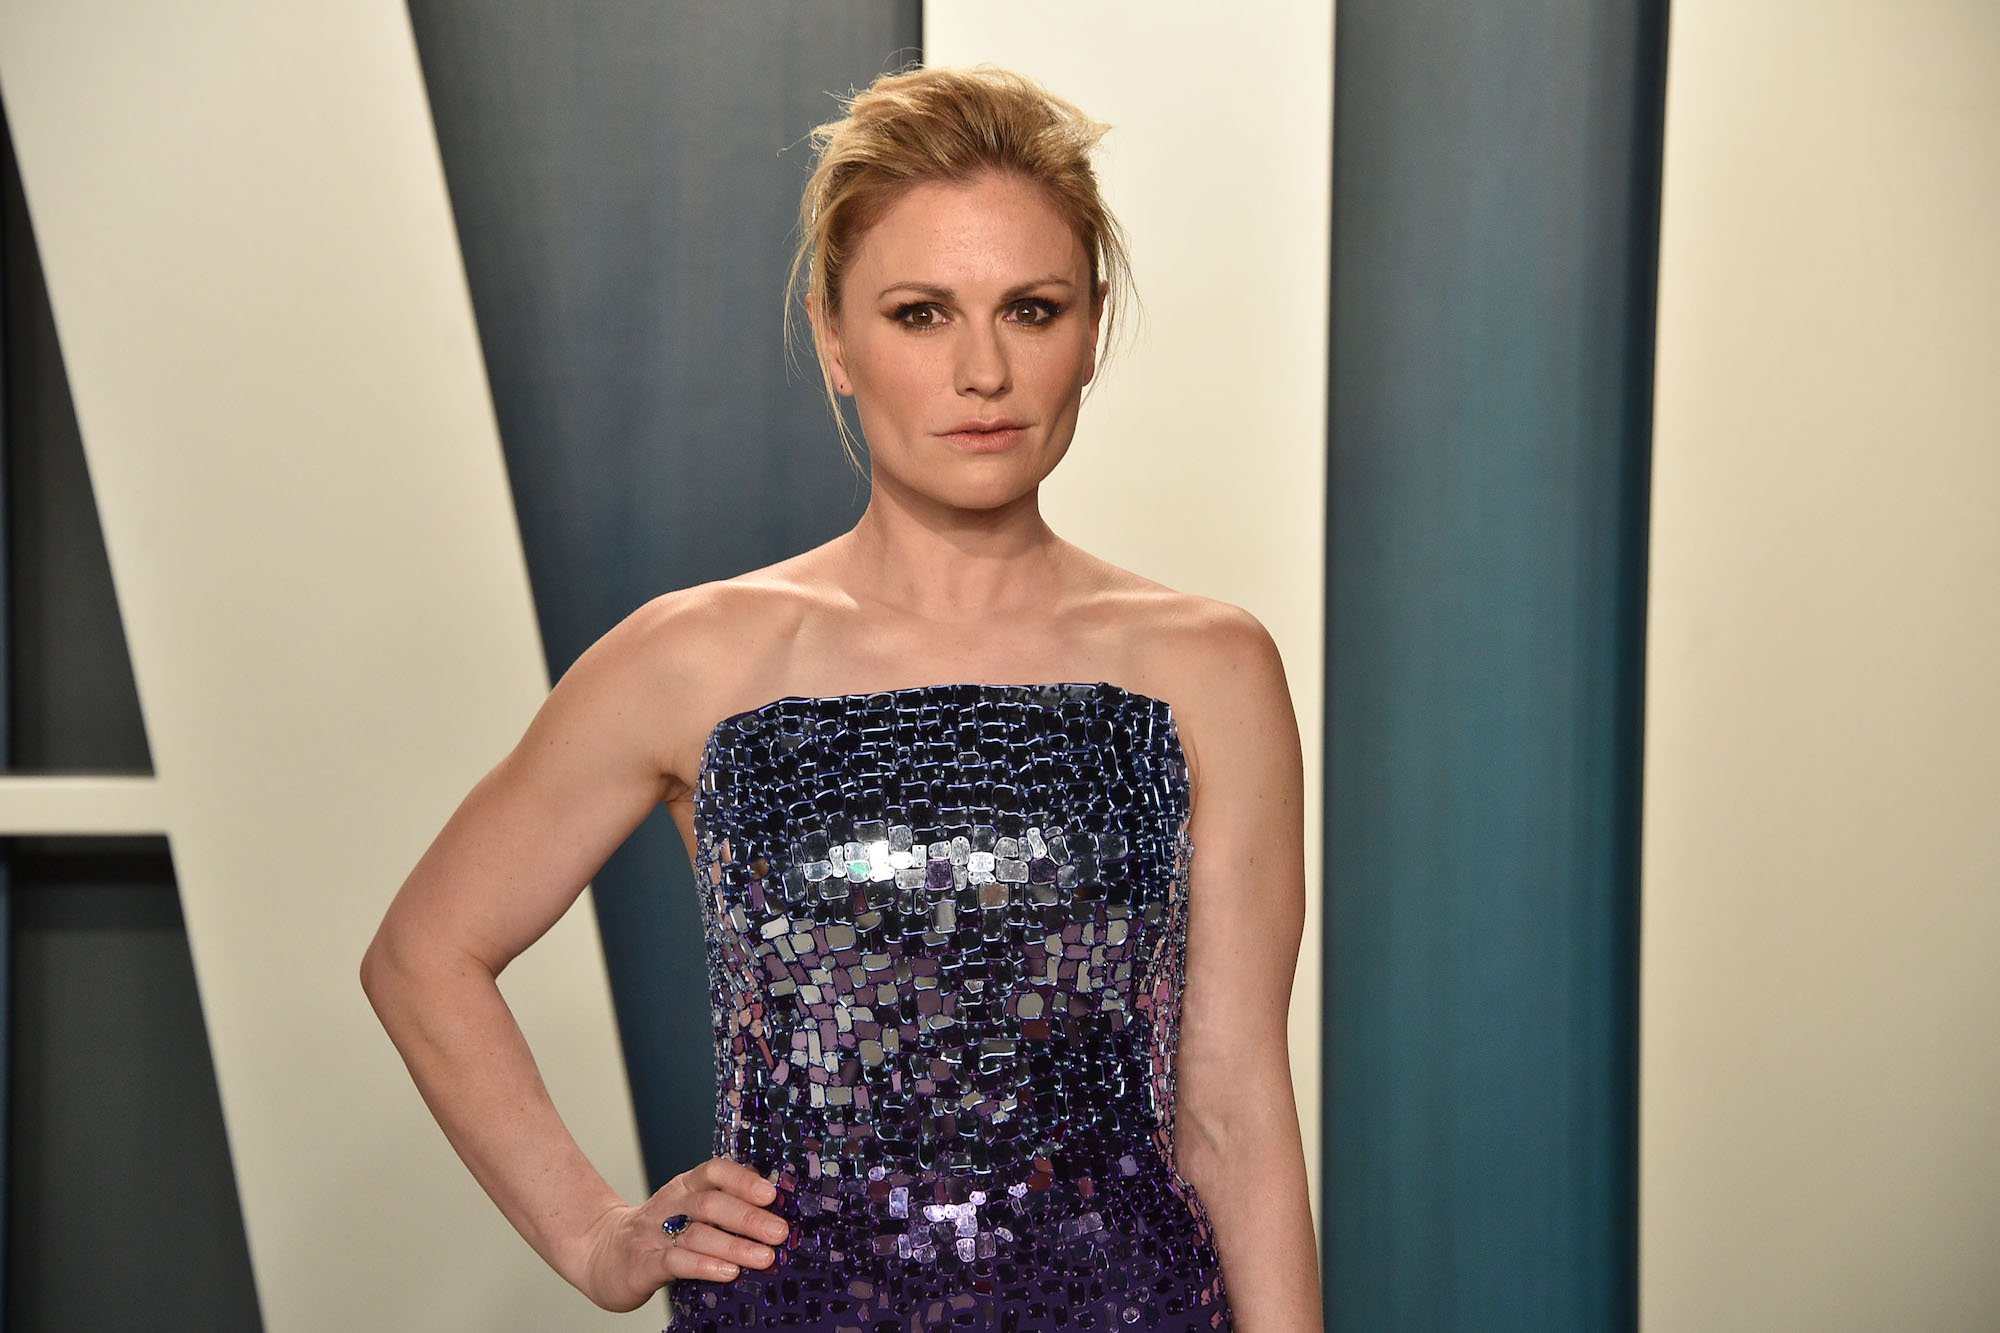 Anna Paquin smiling slightly in front of a blue background